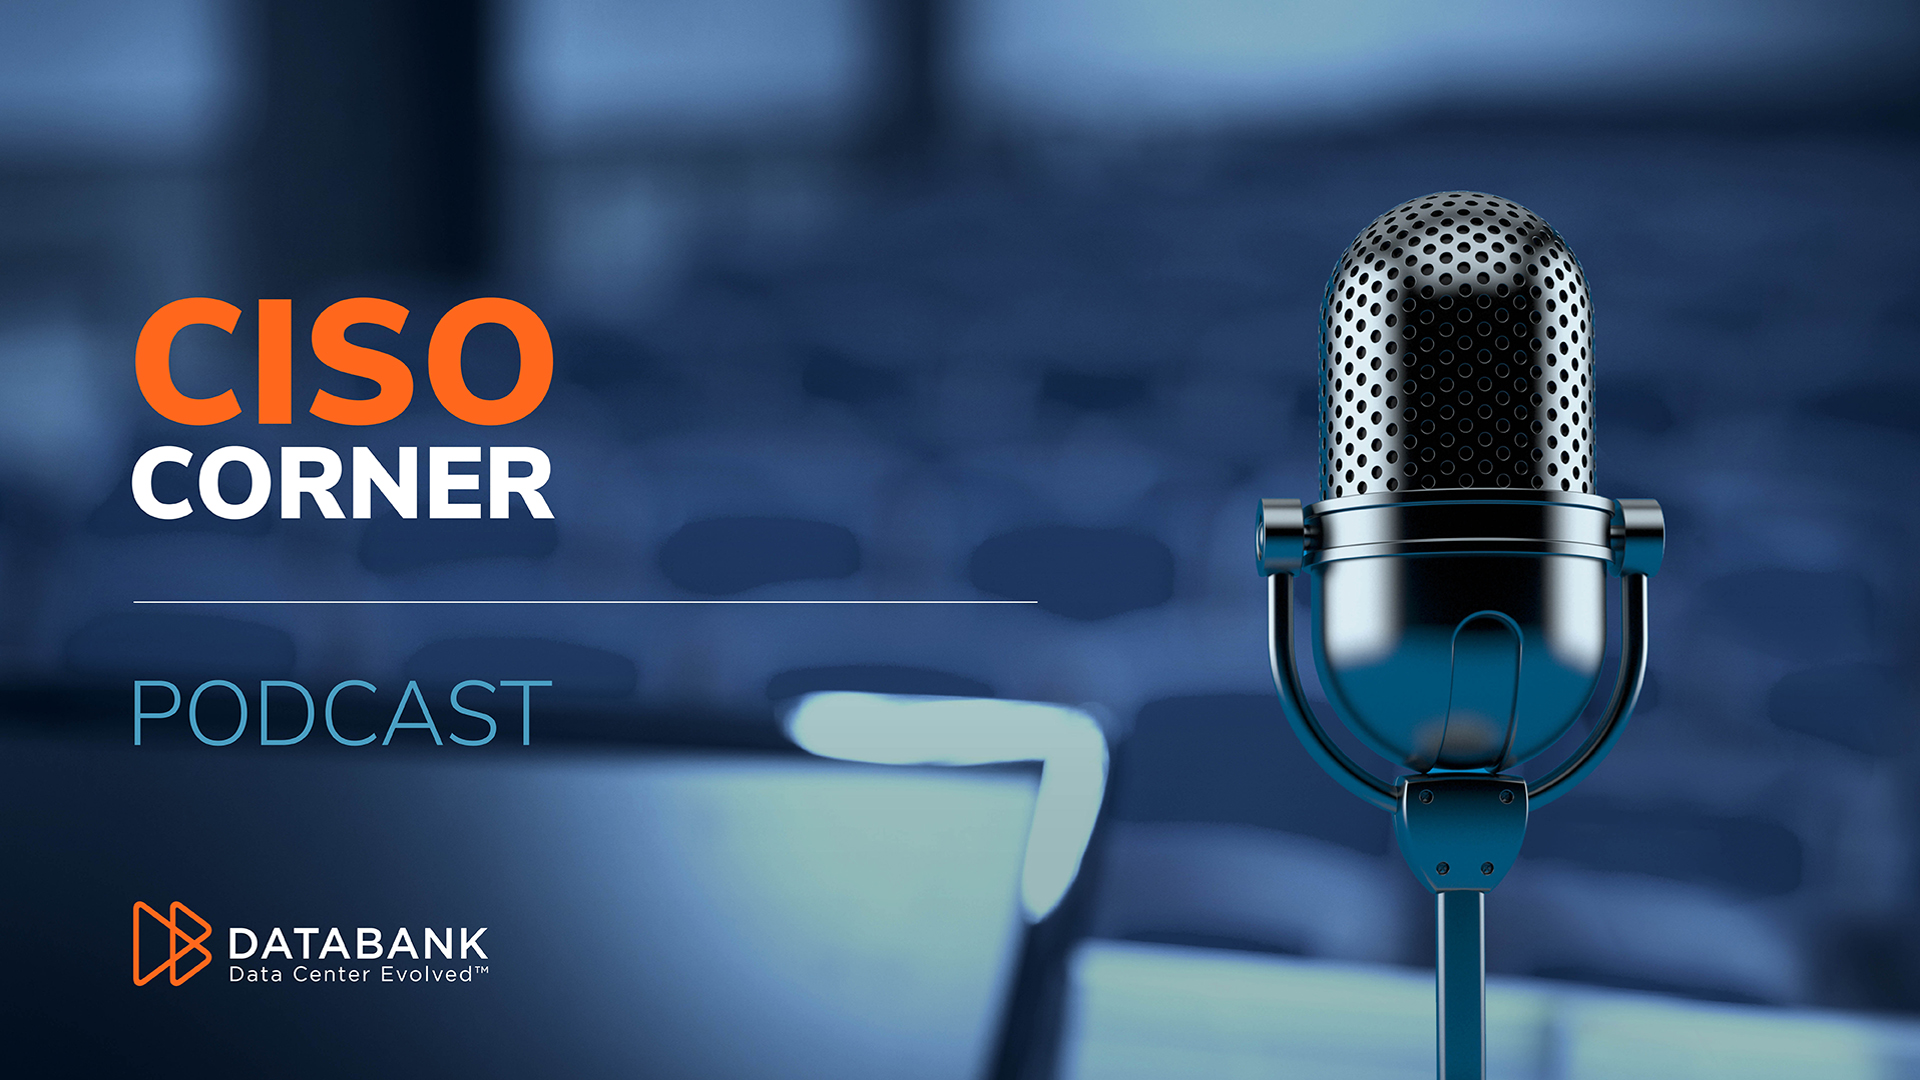 CISO Corner – Episode 8: Hackers have demanded ransom. Now what?